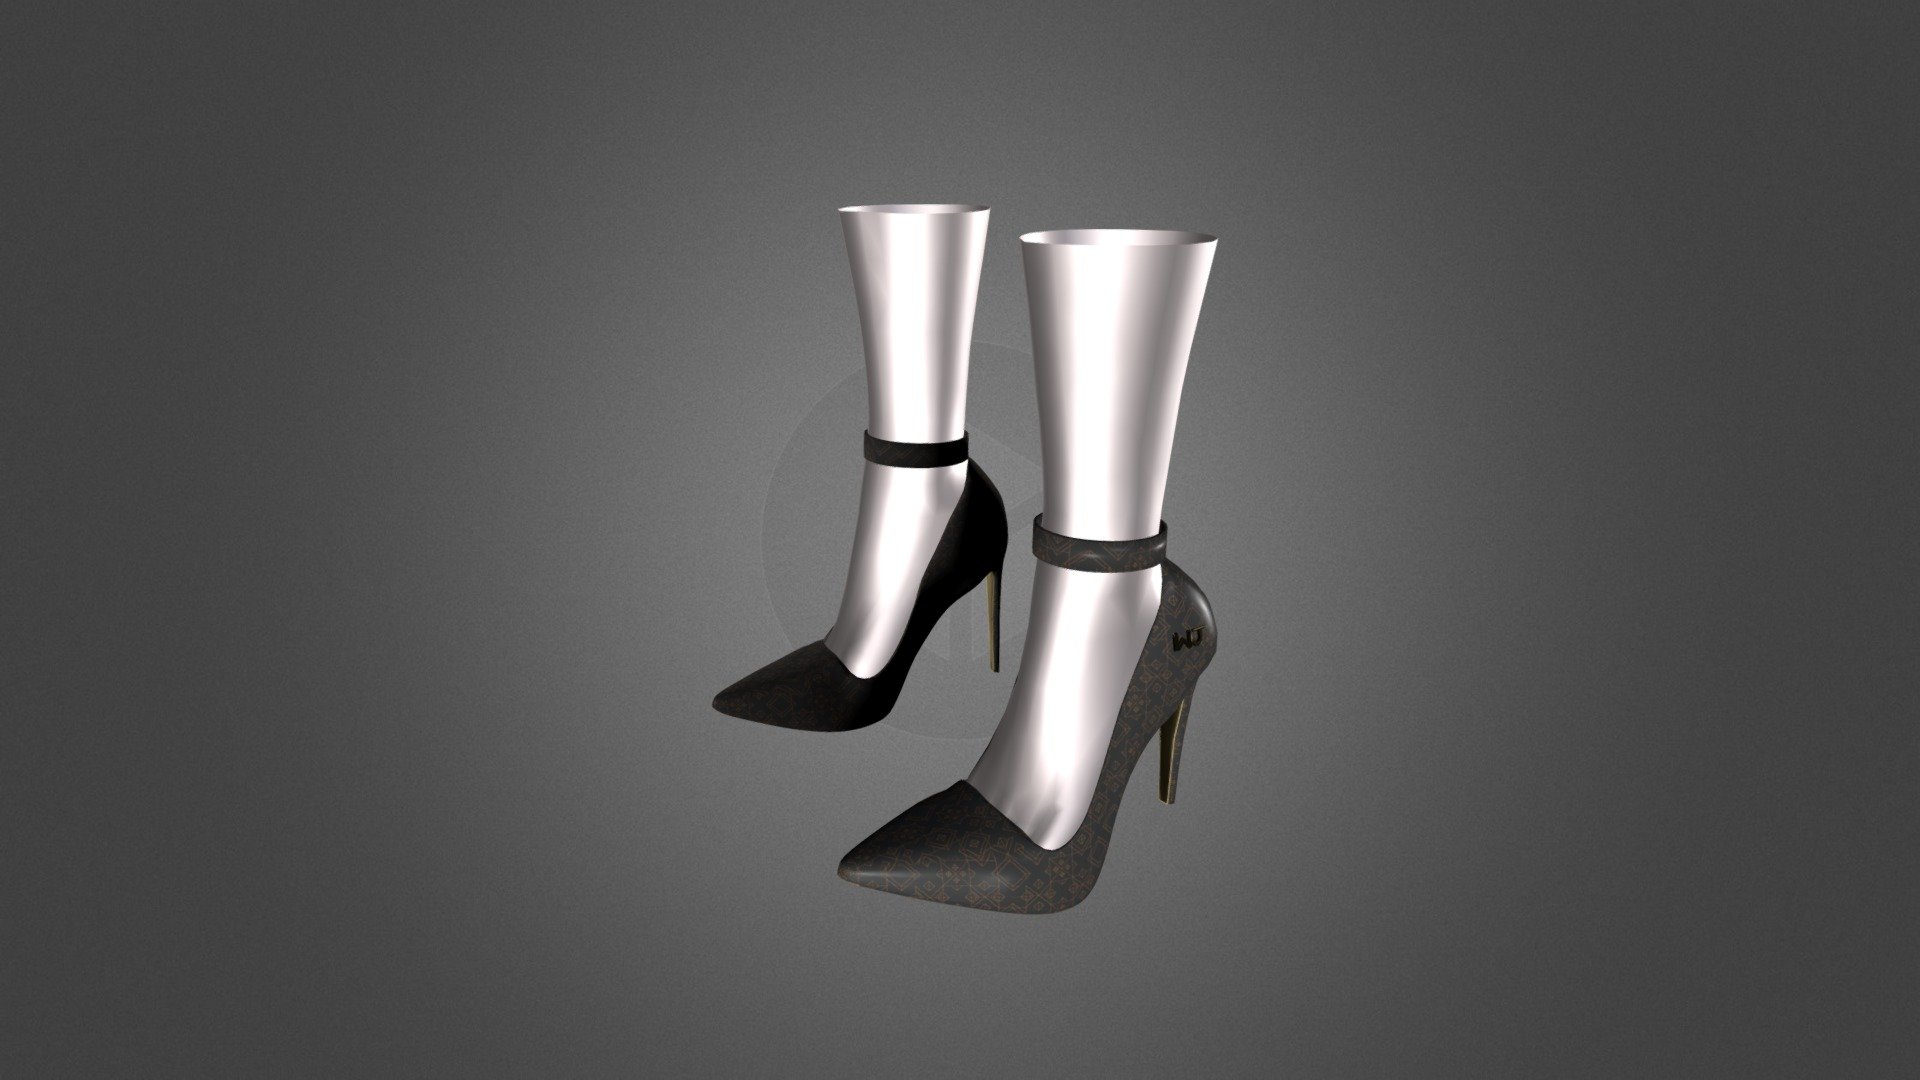 Haute Heels is a set of chic heels for your fashionable needs.

Join the discord for the password in Password-codes channel https://discord.gg/6BWE2nzdFQ

I am still learning to create, so while i did a decent job, there might be some spots here and there that might need touching up.
This product is free to use personally and commercially, just make sure to credit WatermelonJustice.

Slight Unity and Blender Knowledge needed. ALSO! check out the gumroad @ watermelonjustice for more 5+ textures

This product is free to use personally and commercially, just make sure to credit WatermelonJustice 3d model